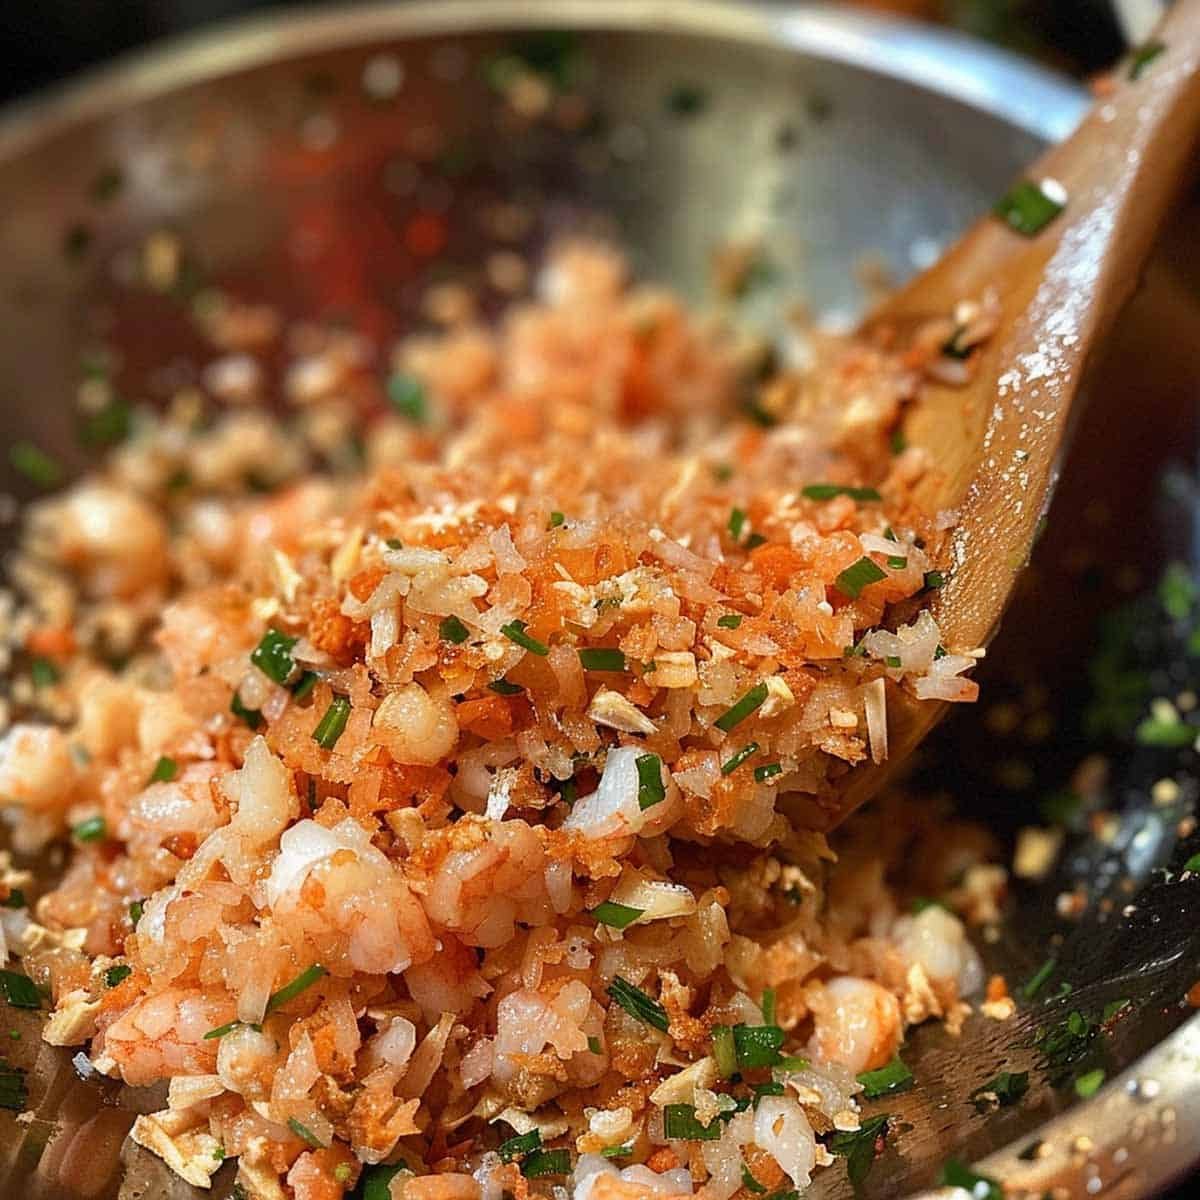 Finely chopping fresh shrimp and combining it with red curry paste, fish sauce, minced lemongrass, and cilantro for Thai Shrimp Cakes (Tod Mun Goong)